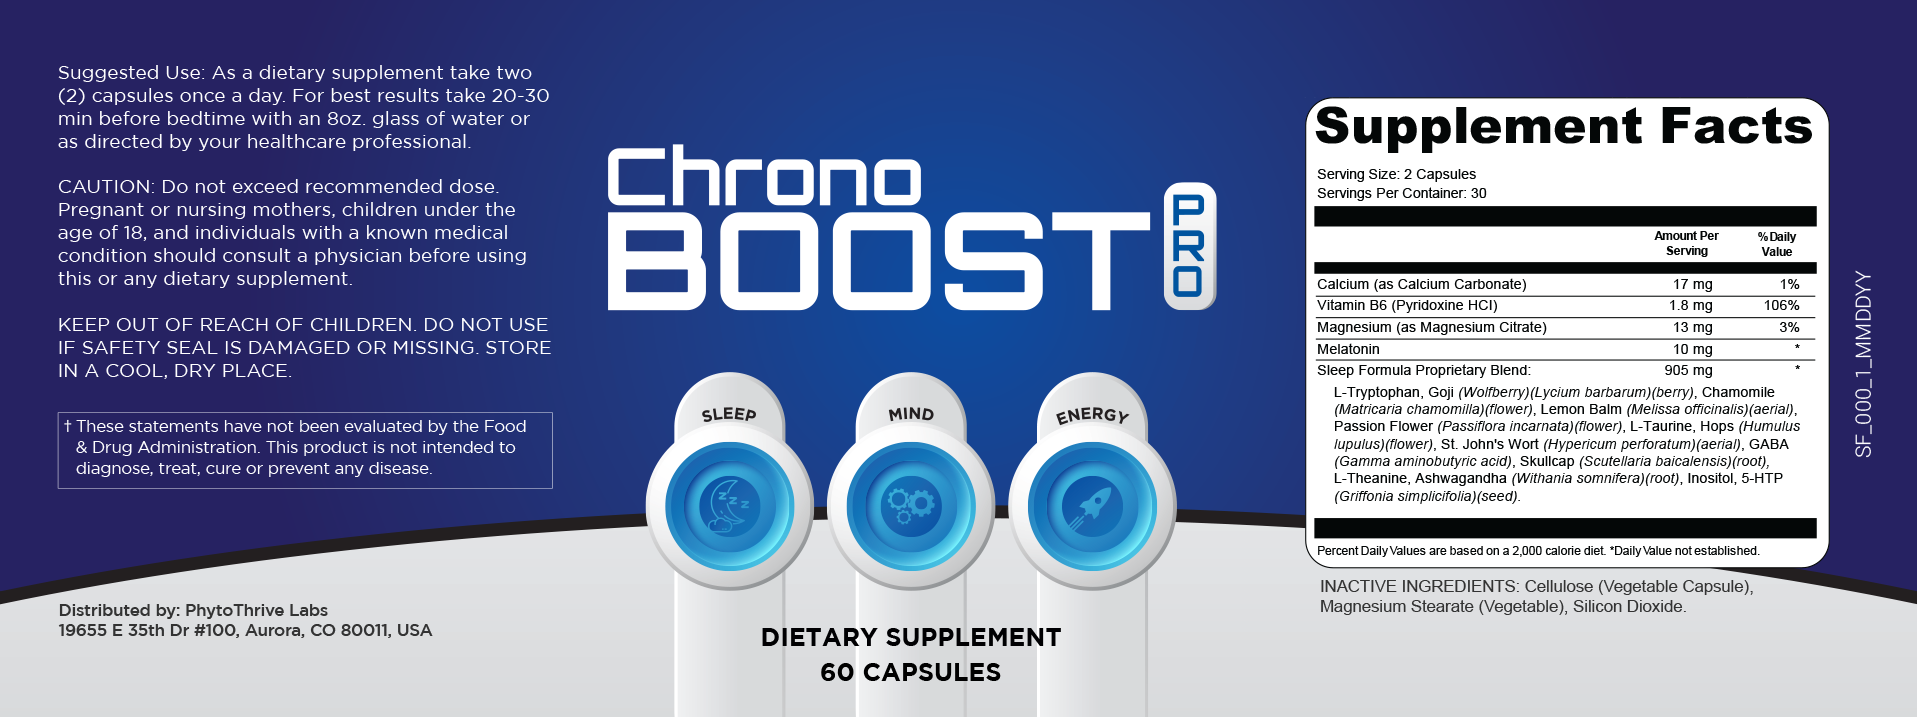 ChronoBoost Pro healthy brain supplement Facts